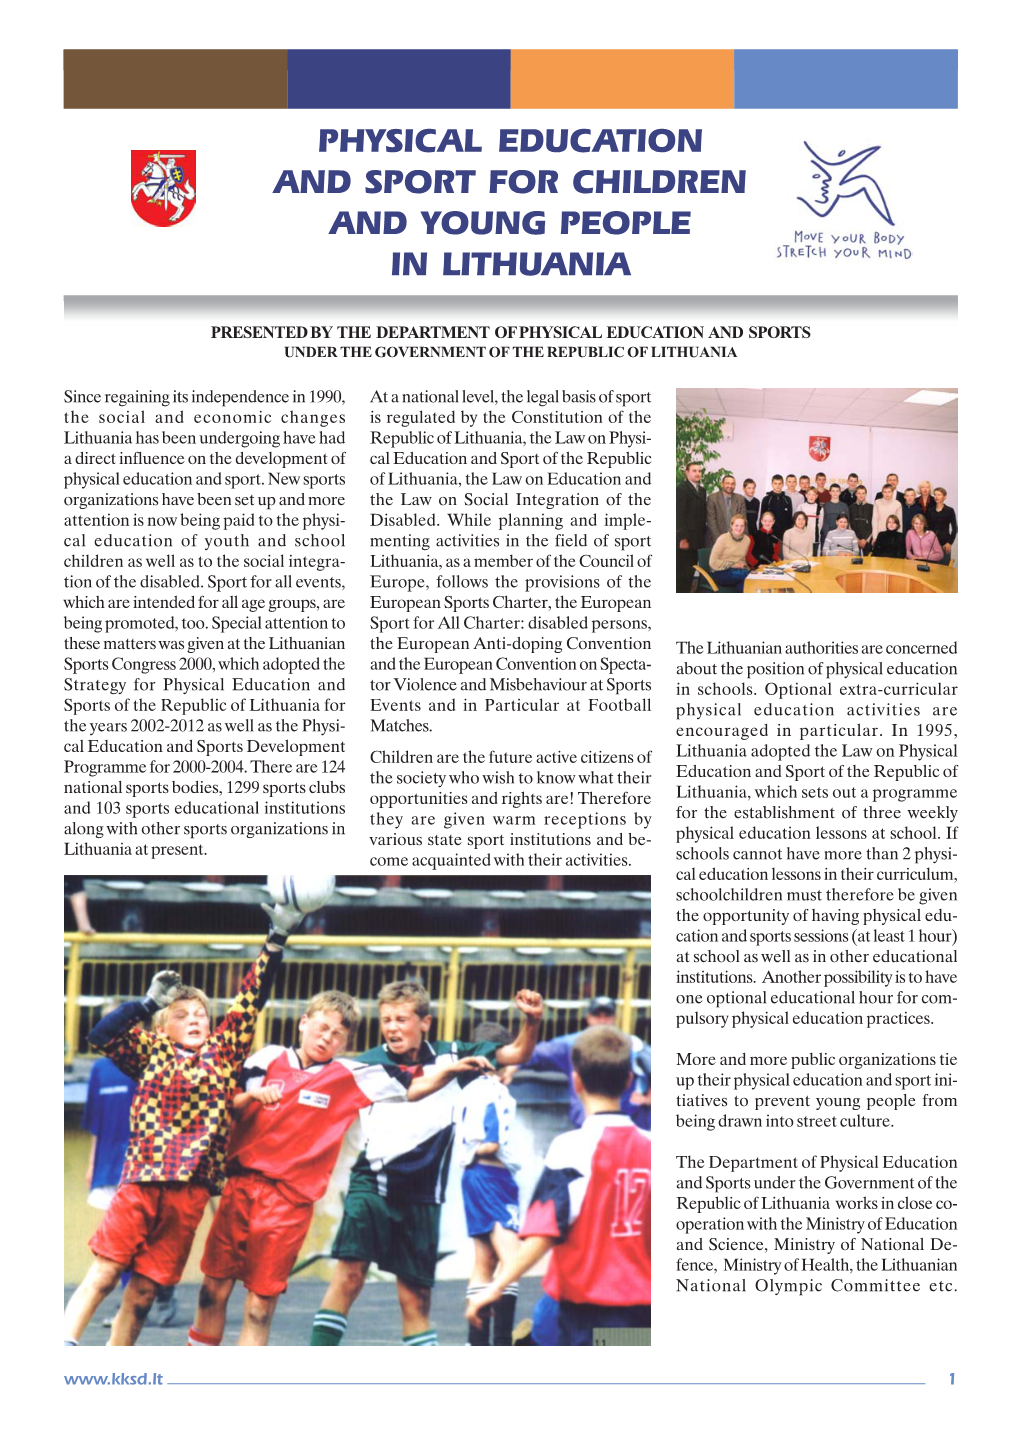 Physical Education and Sport for Children and Young People in Lithuania